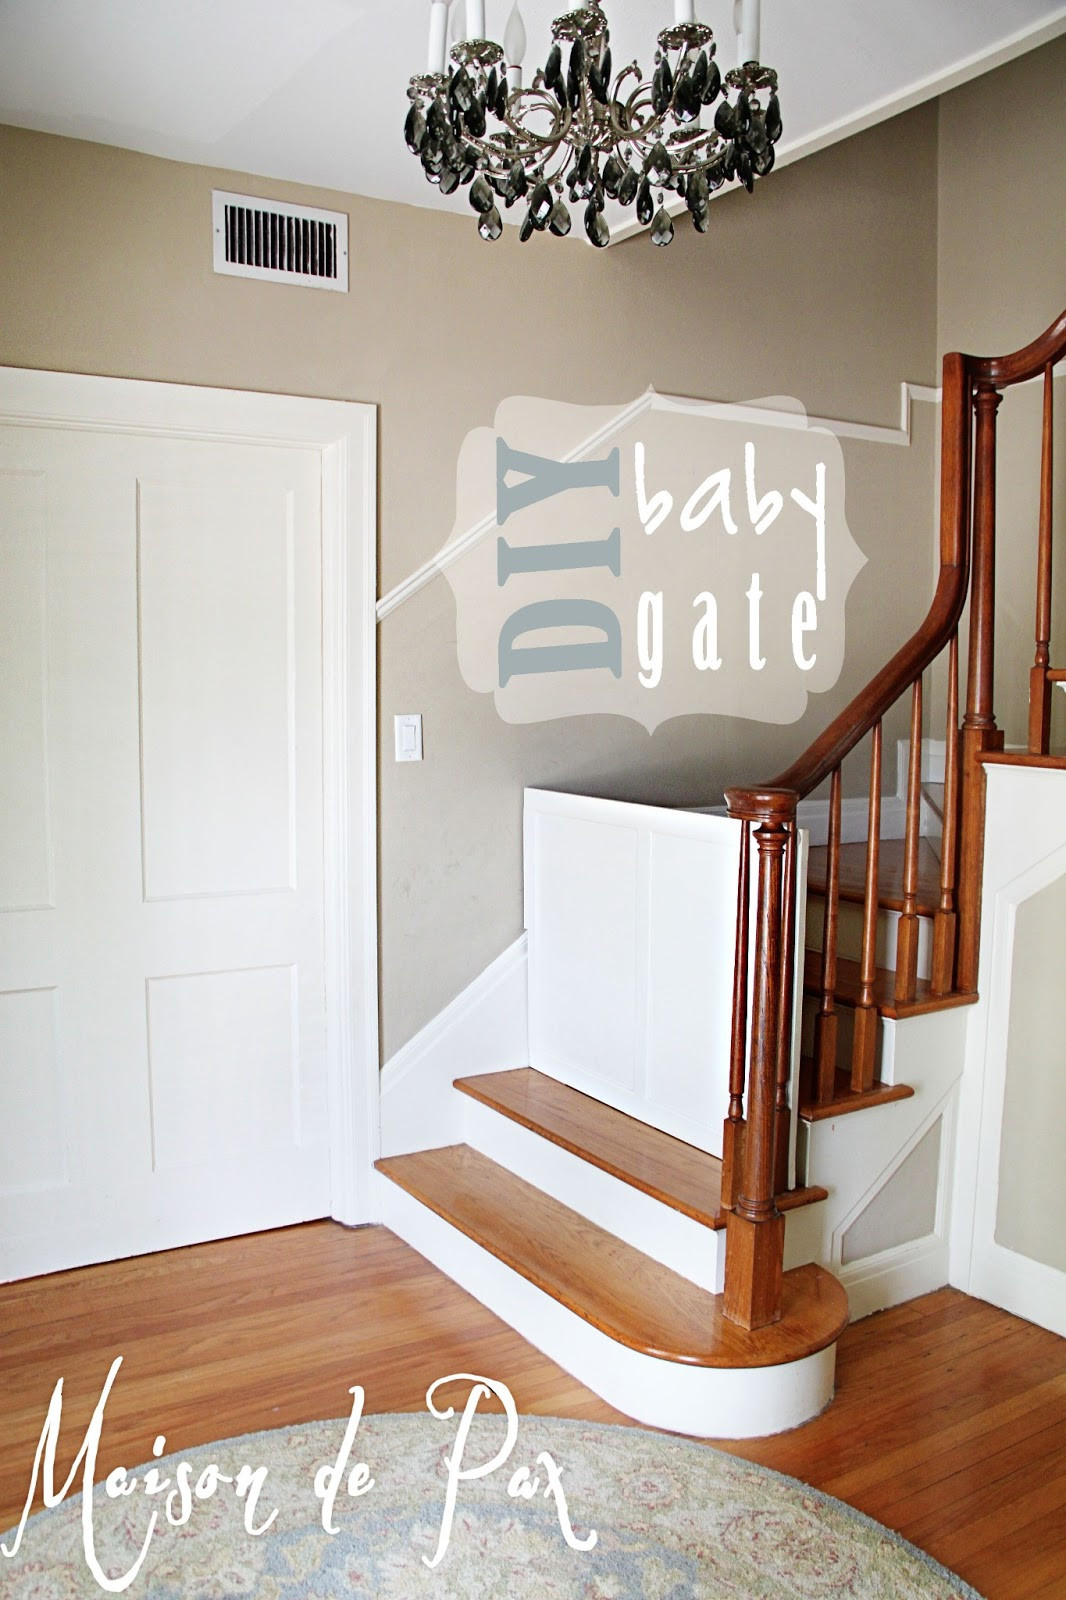 DIY Baby Gate For Stairs
 DIY Classy Baby Gate Maison de Pax